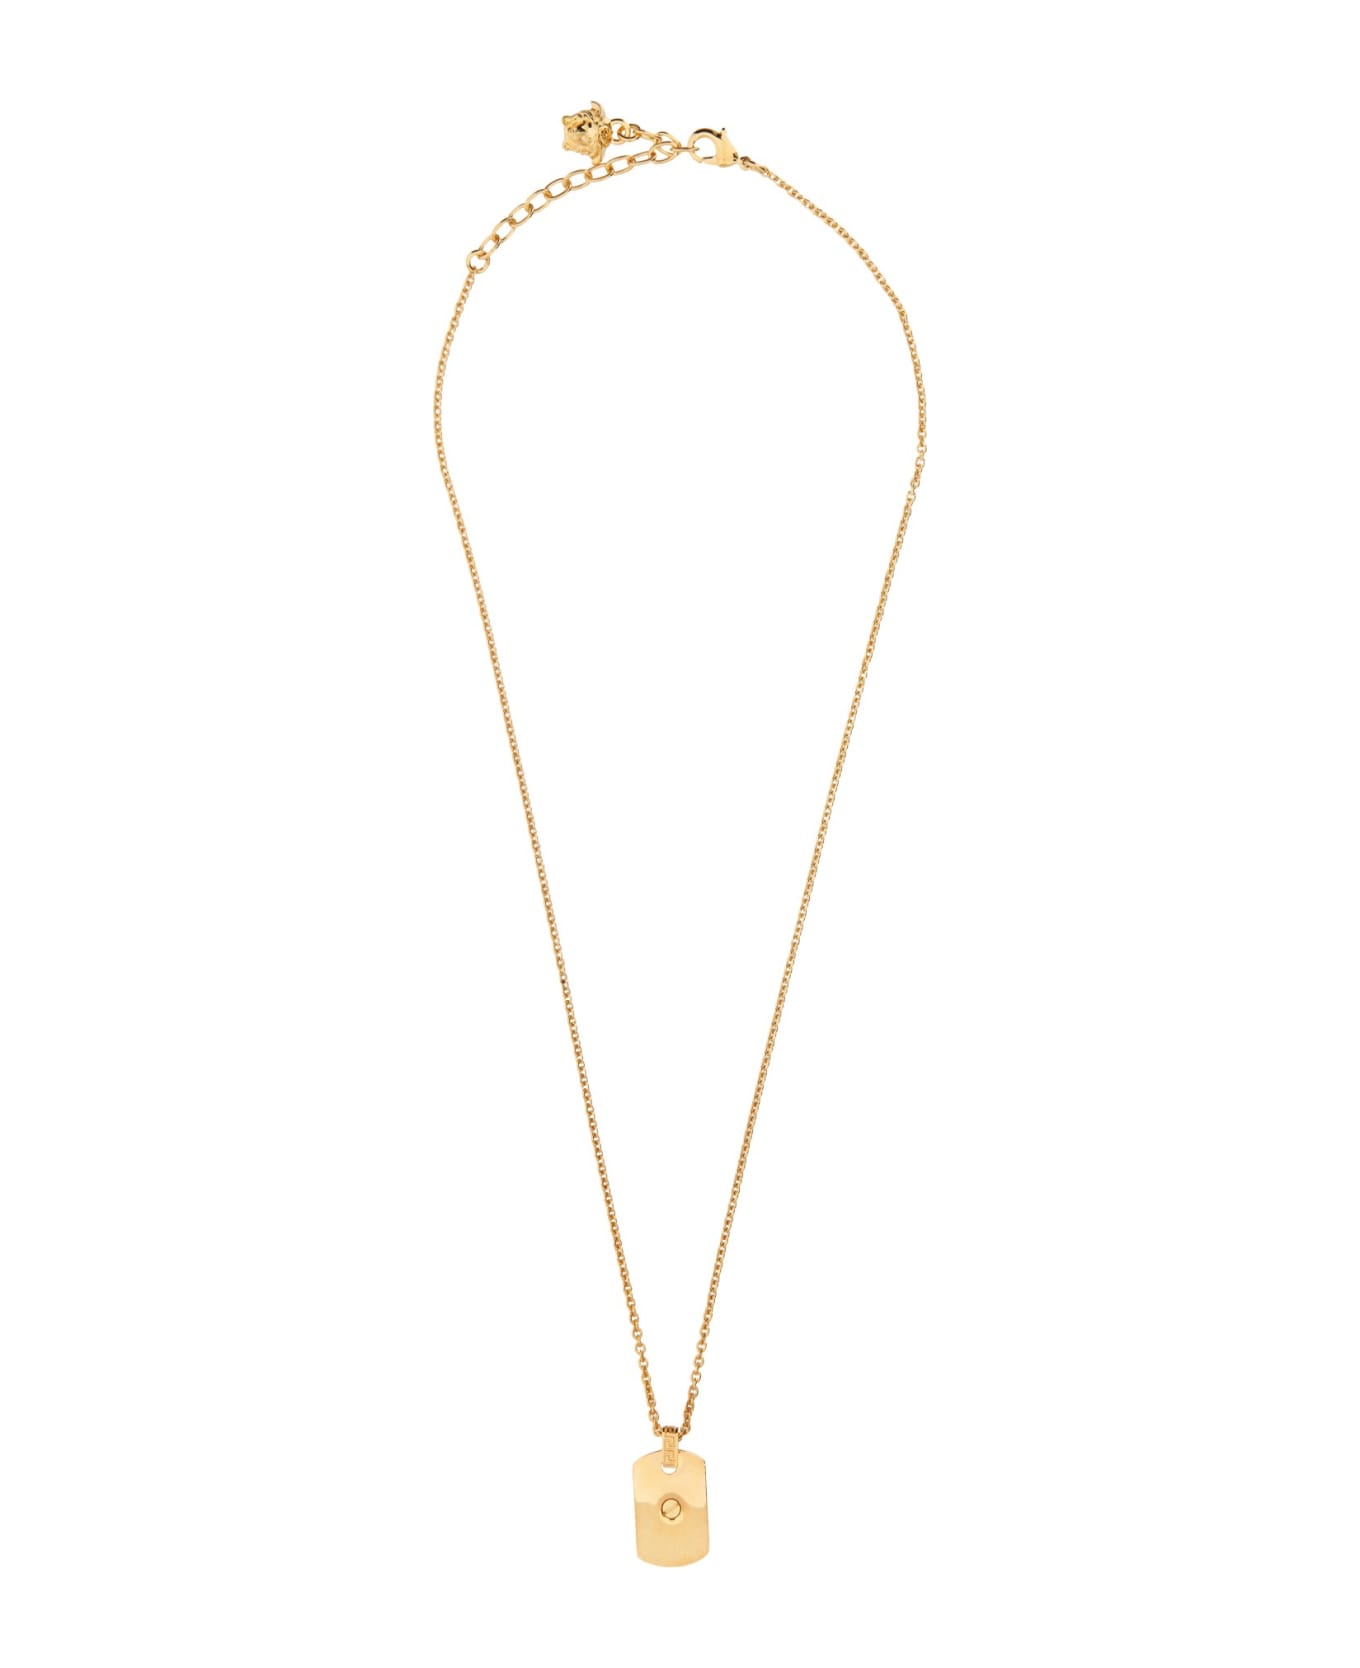 Versace Jellyfish Necklace - Gold